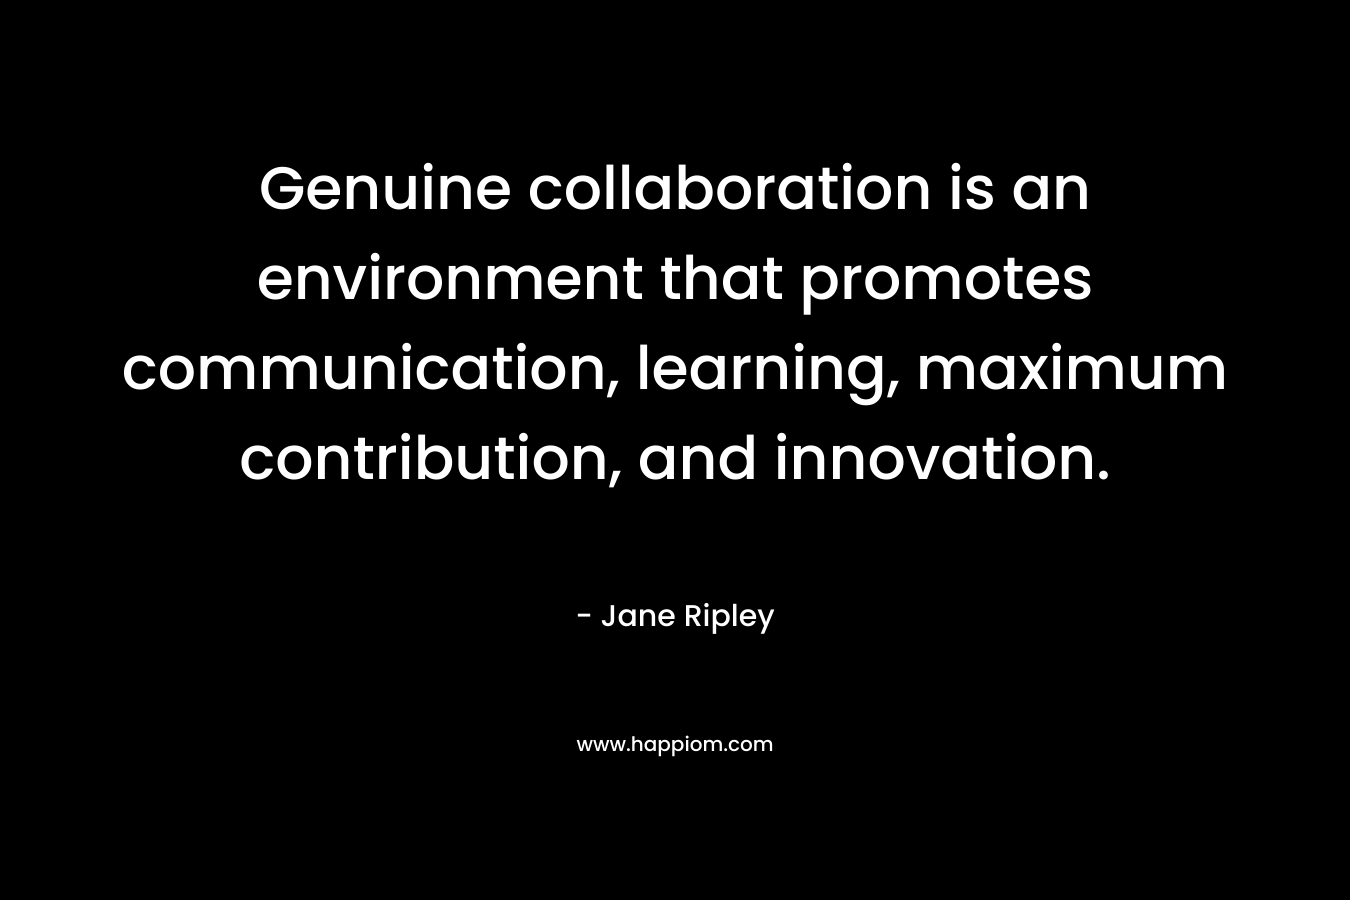 Genuine collaboration is an environment that promotes communication, learning, maximum contribution, and innovation. – Jane Ripley